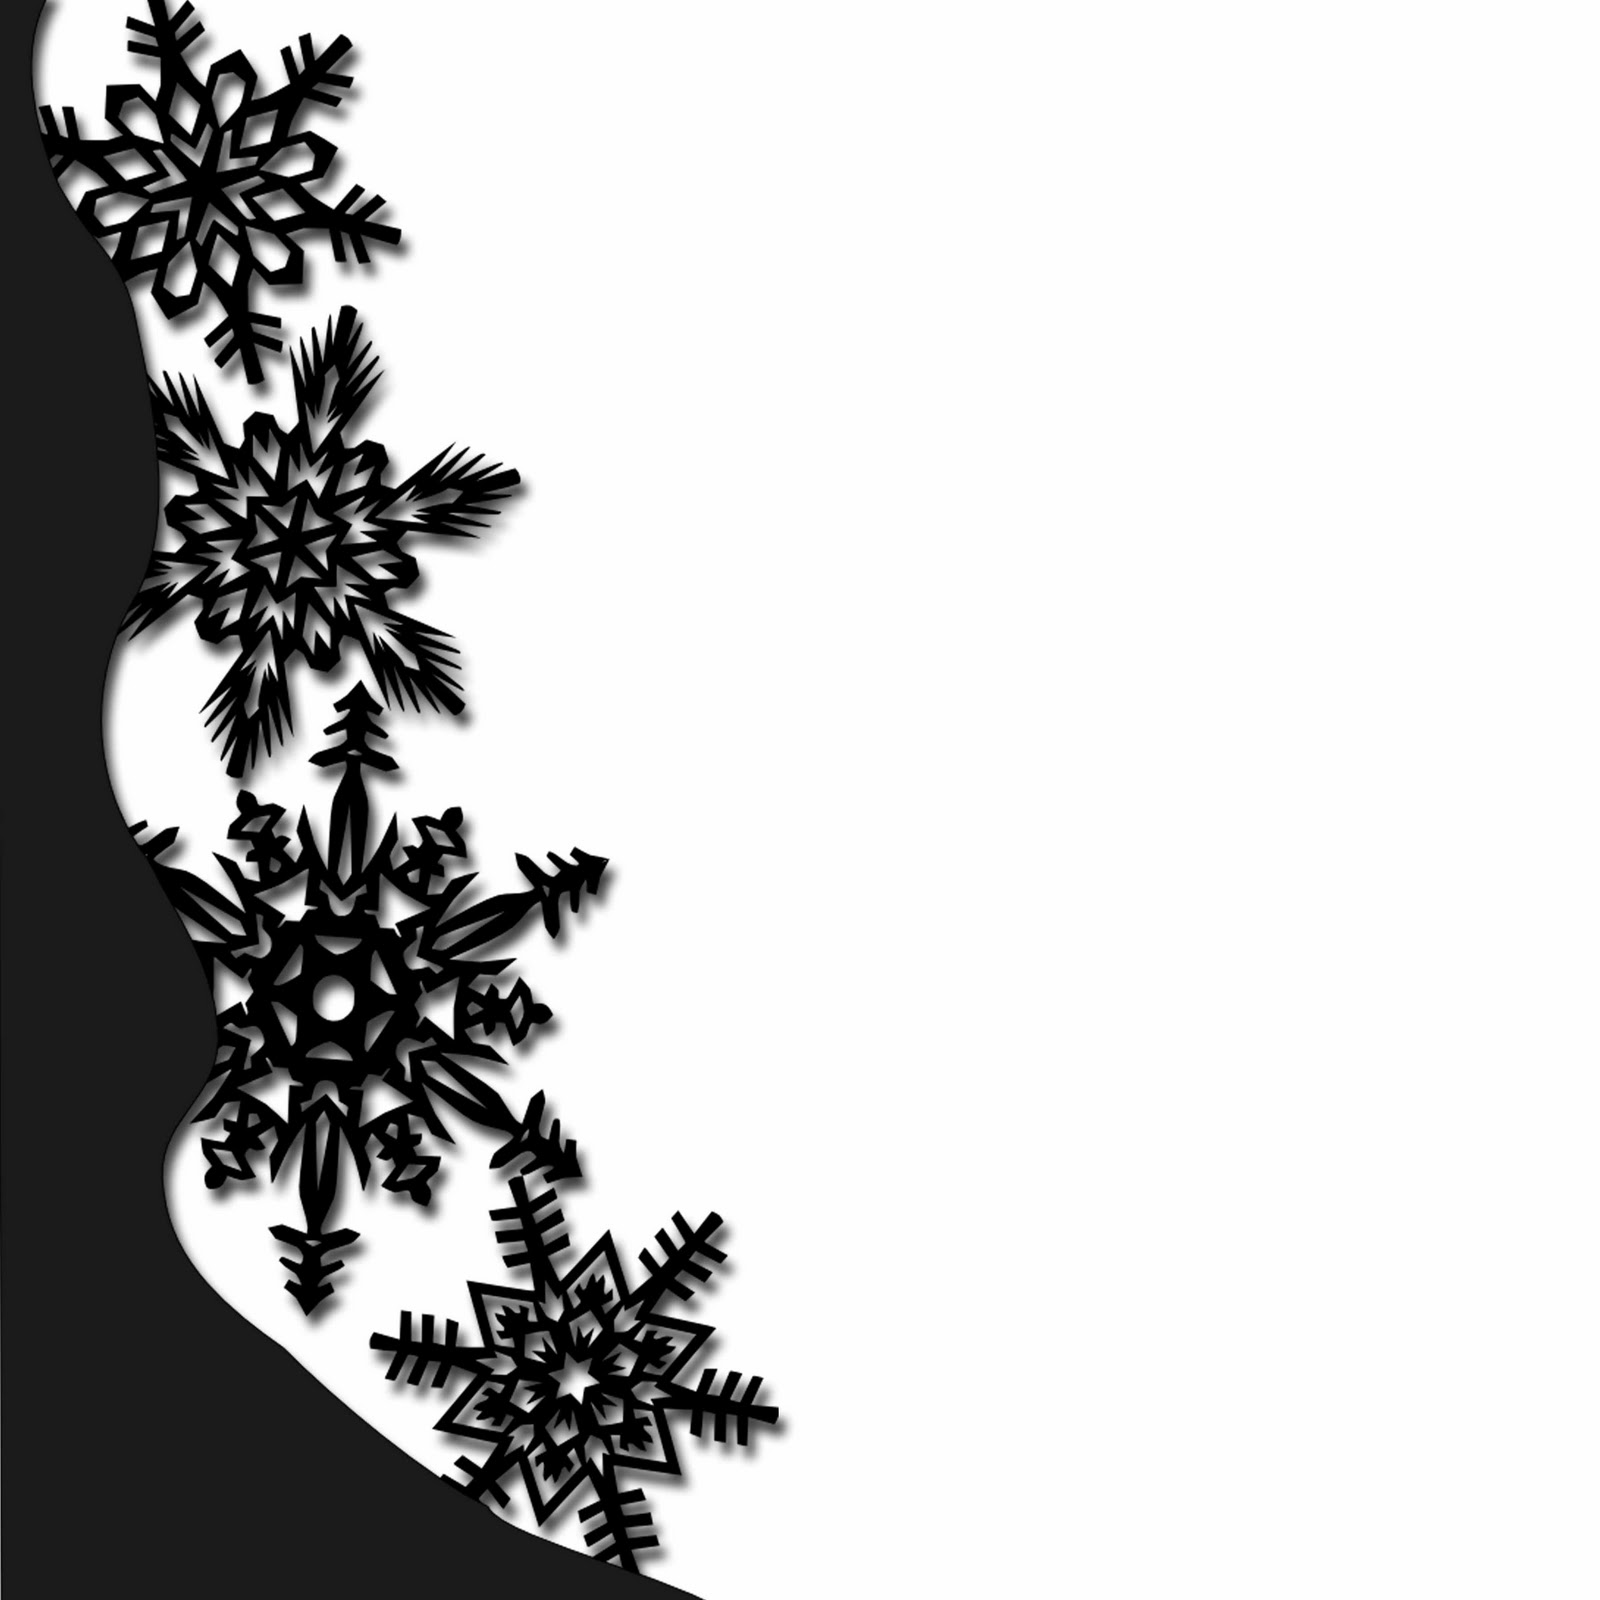 black and white floral wallpaper borders - www.